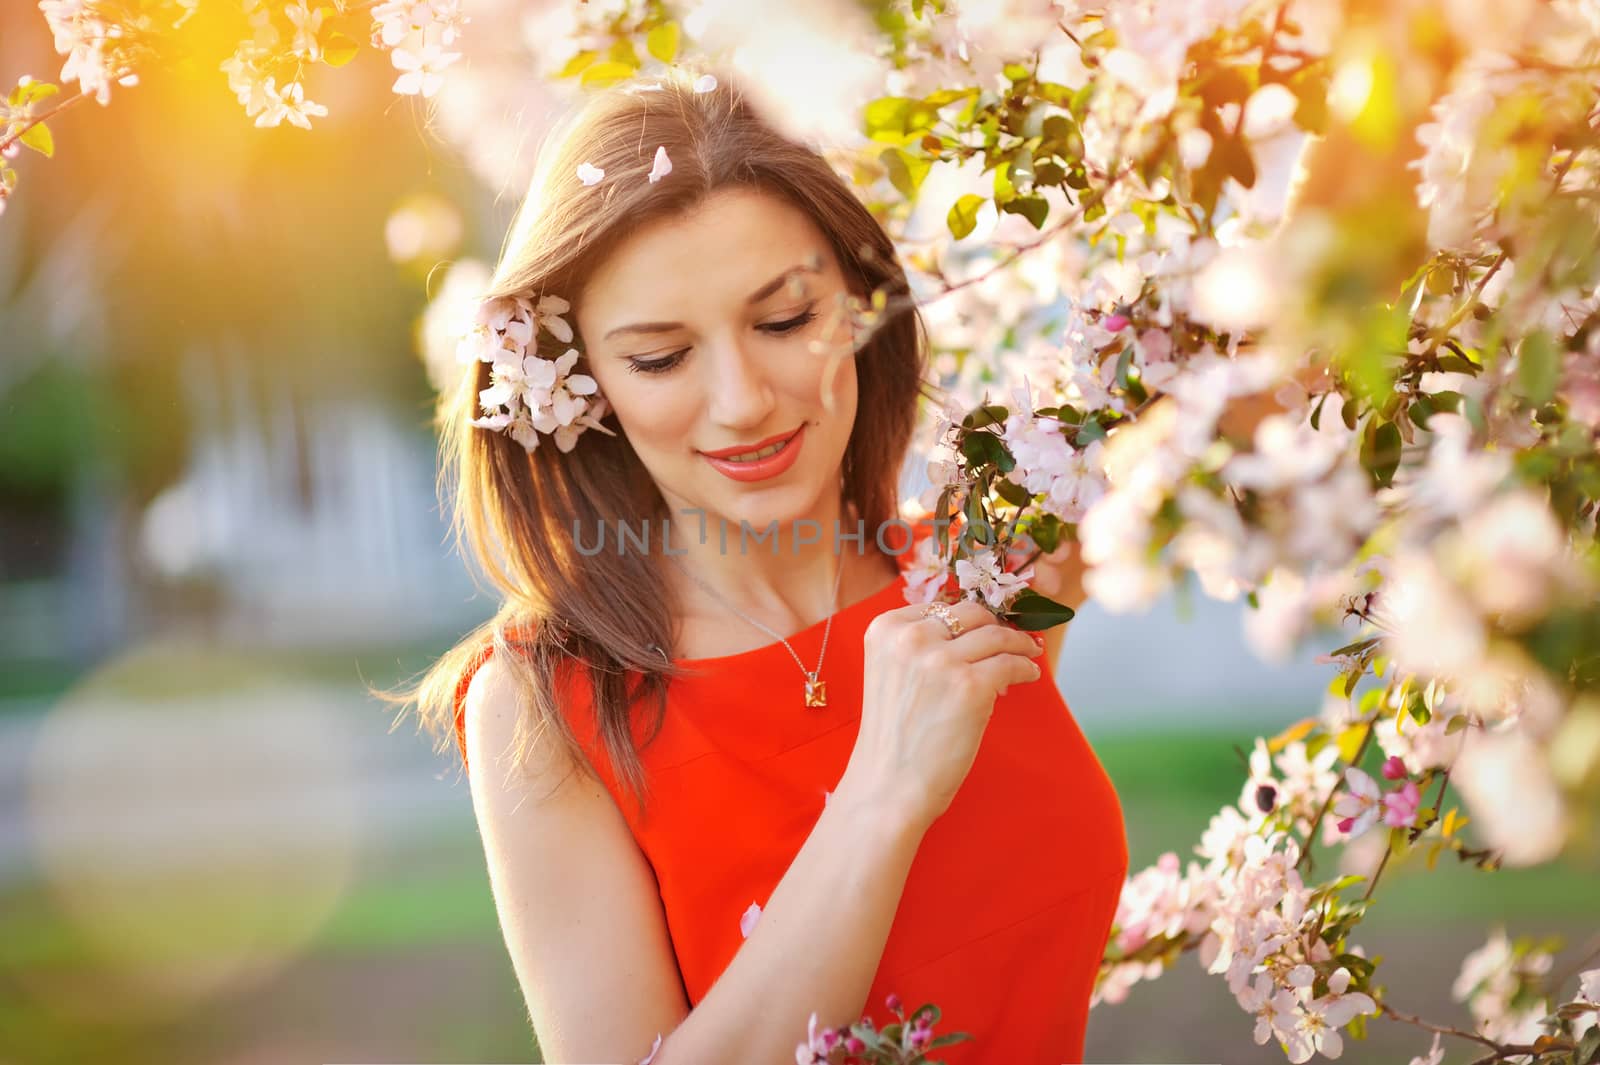 beautiful girl on a walk among the blooming trees by timonko